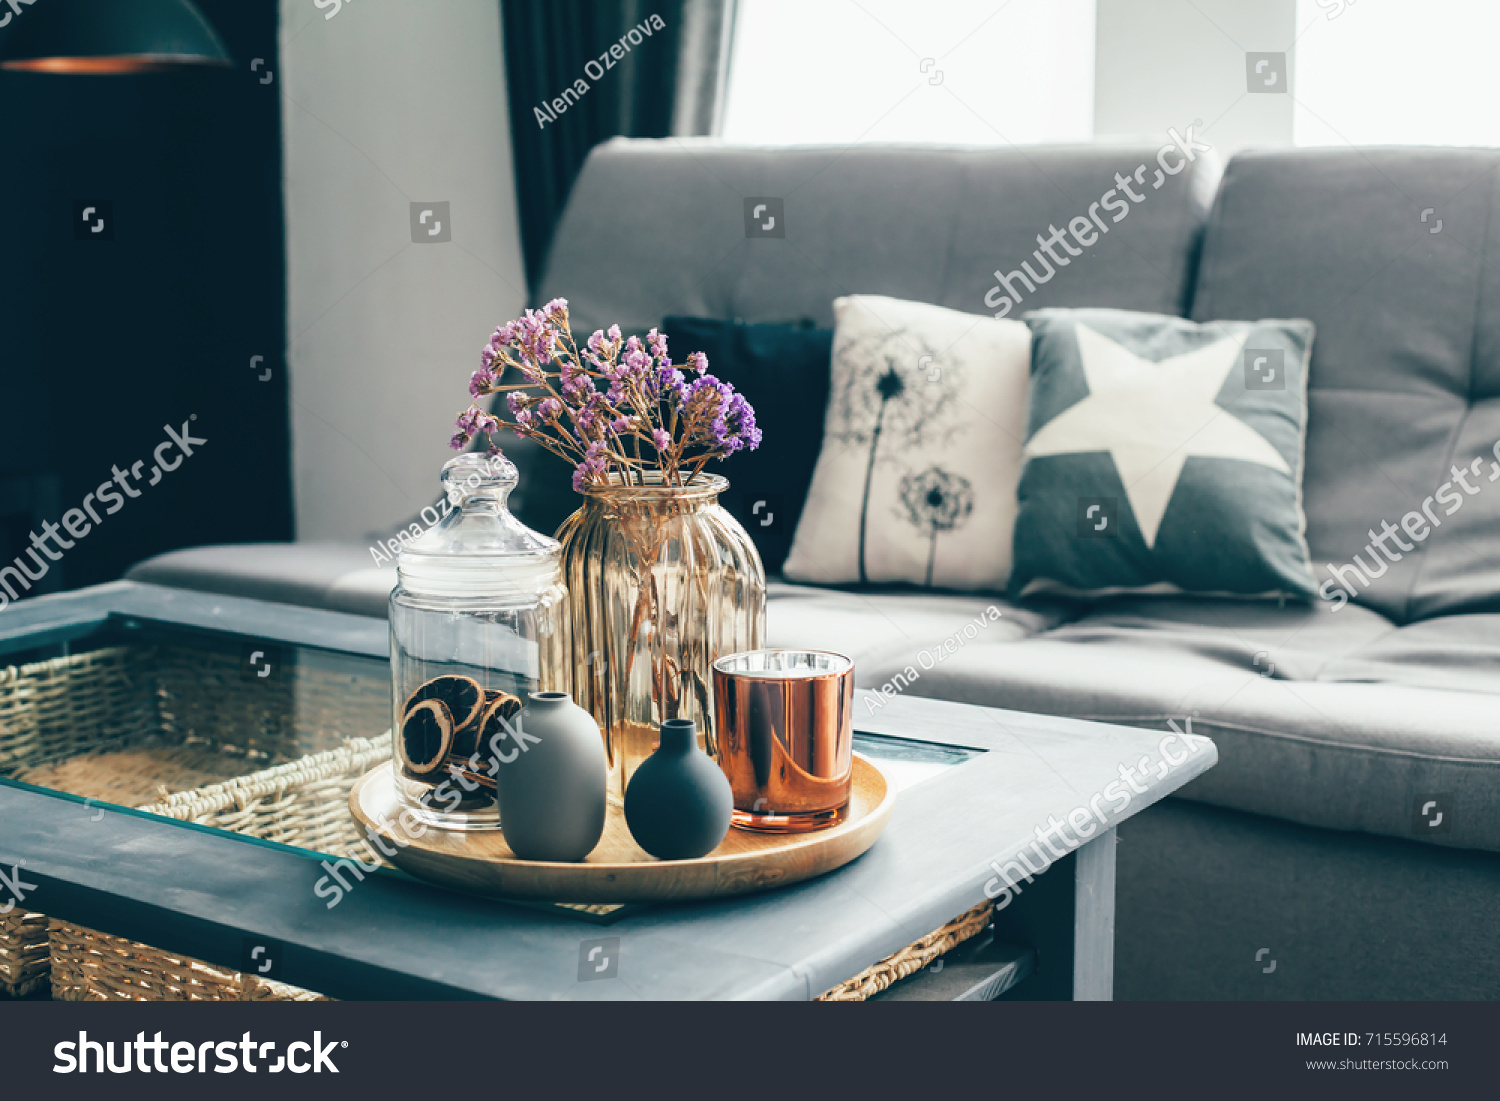 Home interior decor in gray and brown colors: glass jar with dried flowers, vase and candle on the wooden tray on the coffee table over sofa with cushions. Living room decoration. #715596814